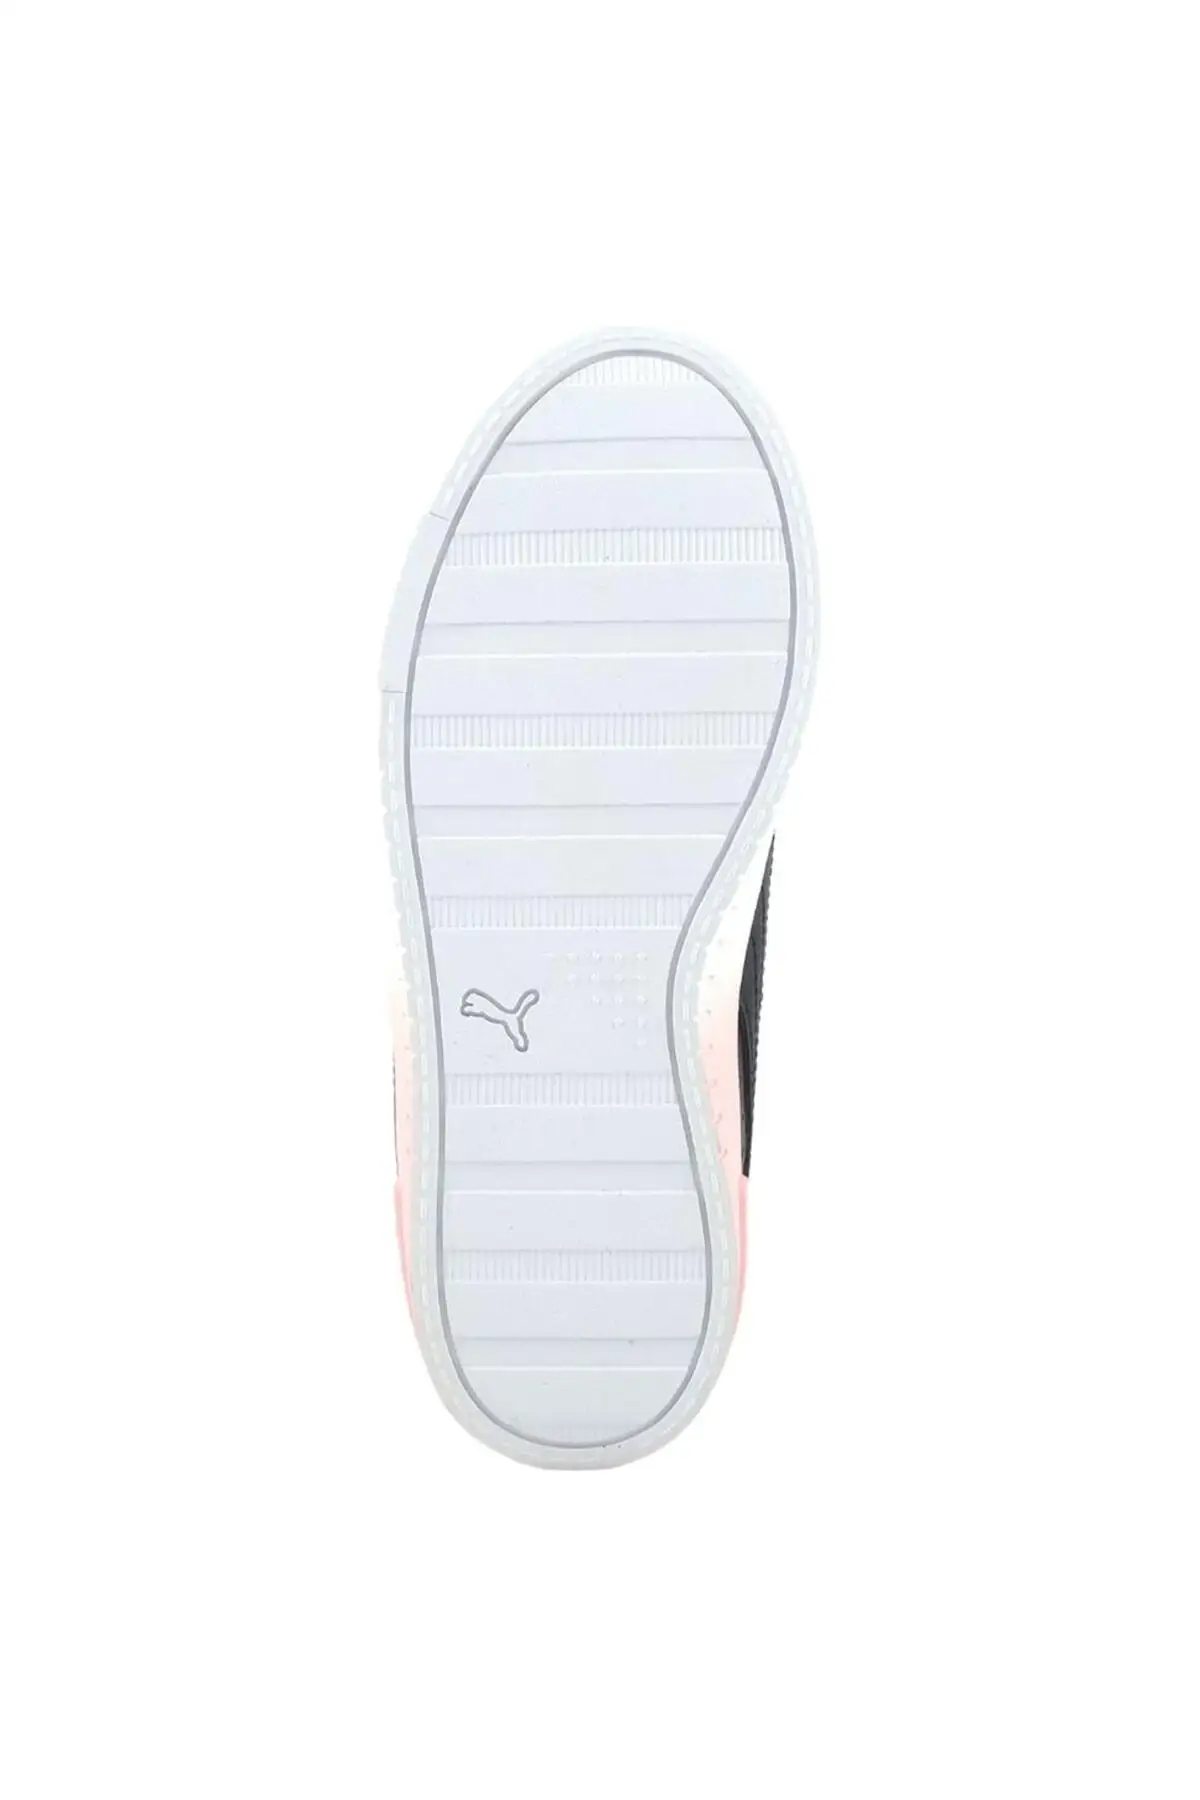 The Ultimate Guide to Women’s Puma Tennis Shoes插图3